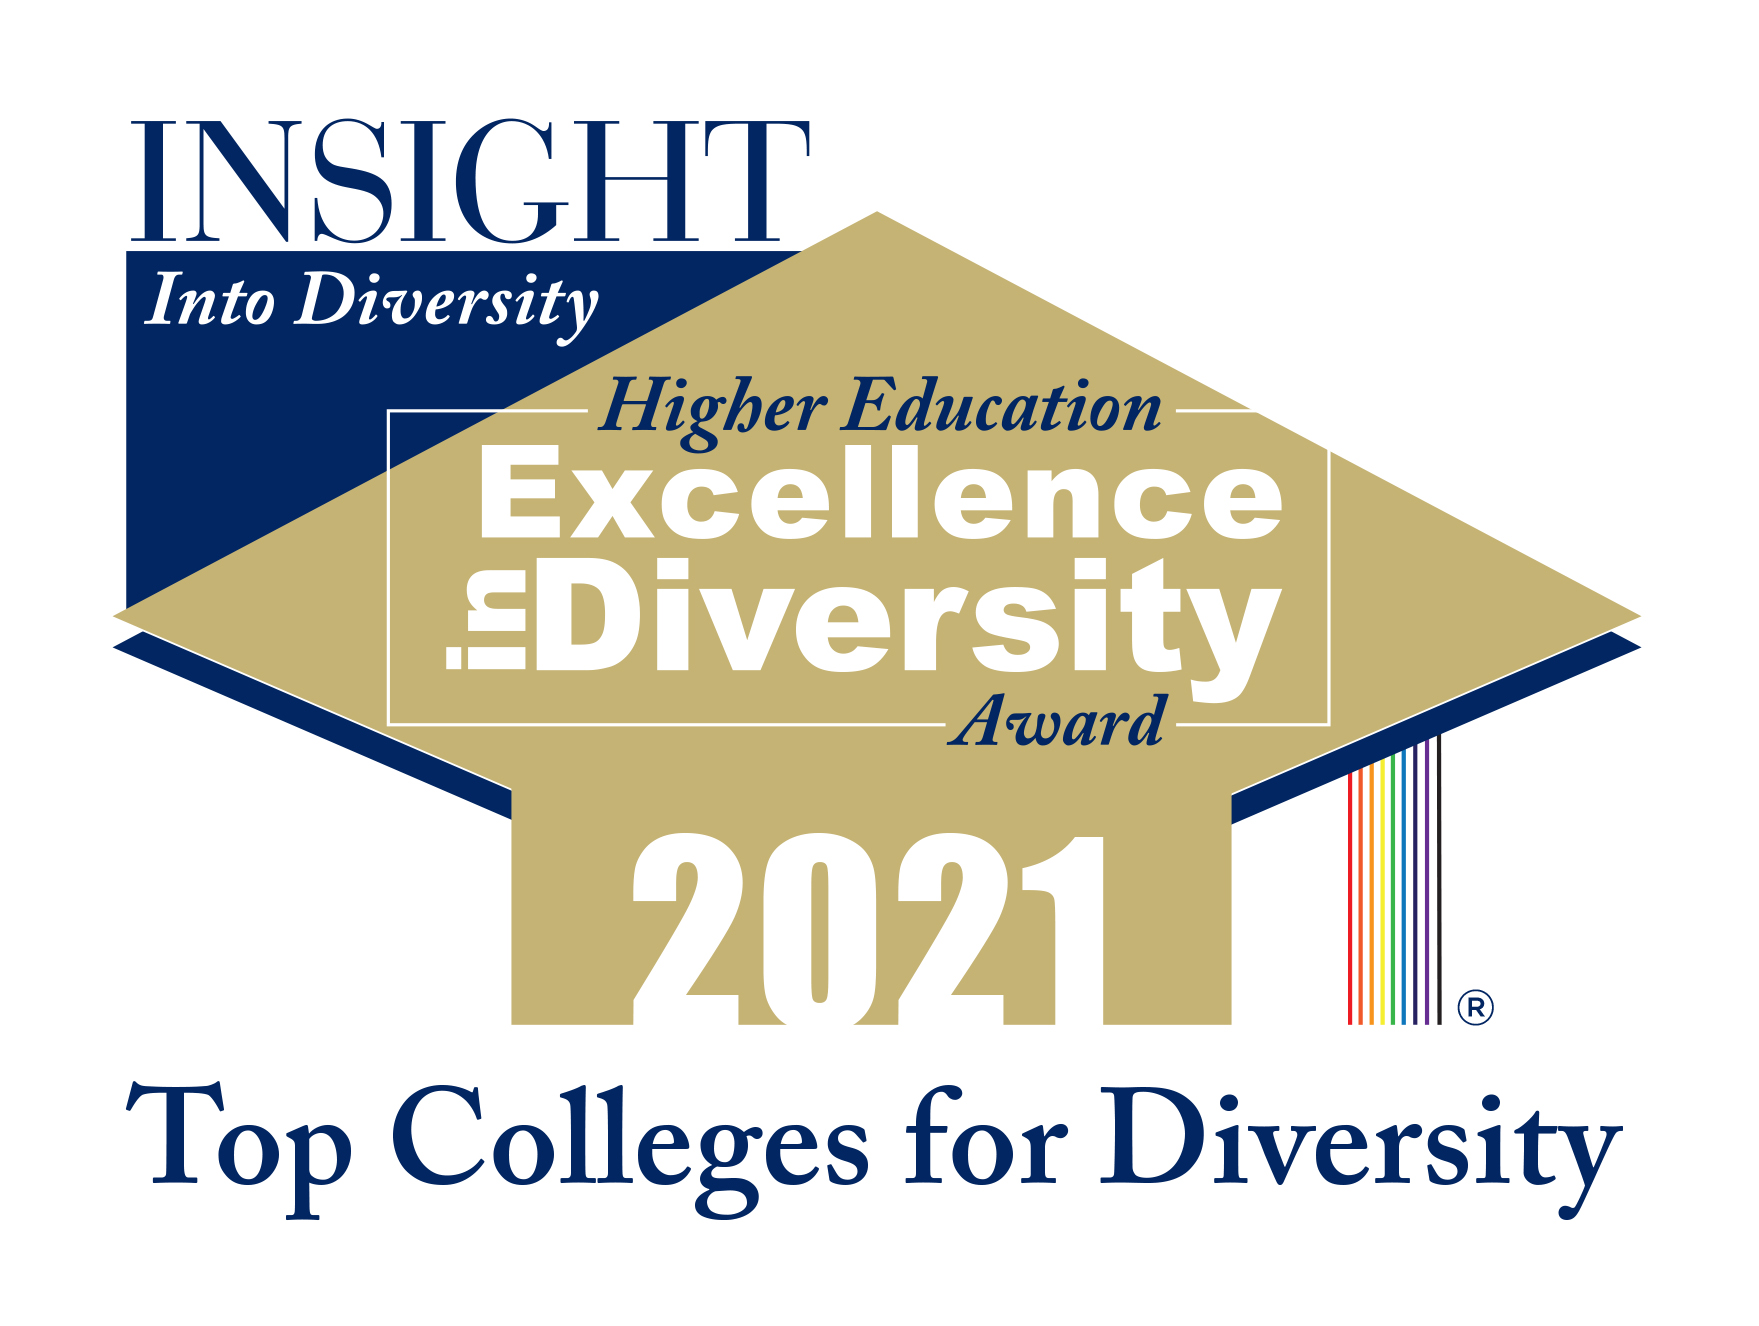 Insight Into Diversity, 2021 Higher Education Excellence in Diversity Award